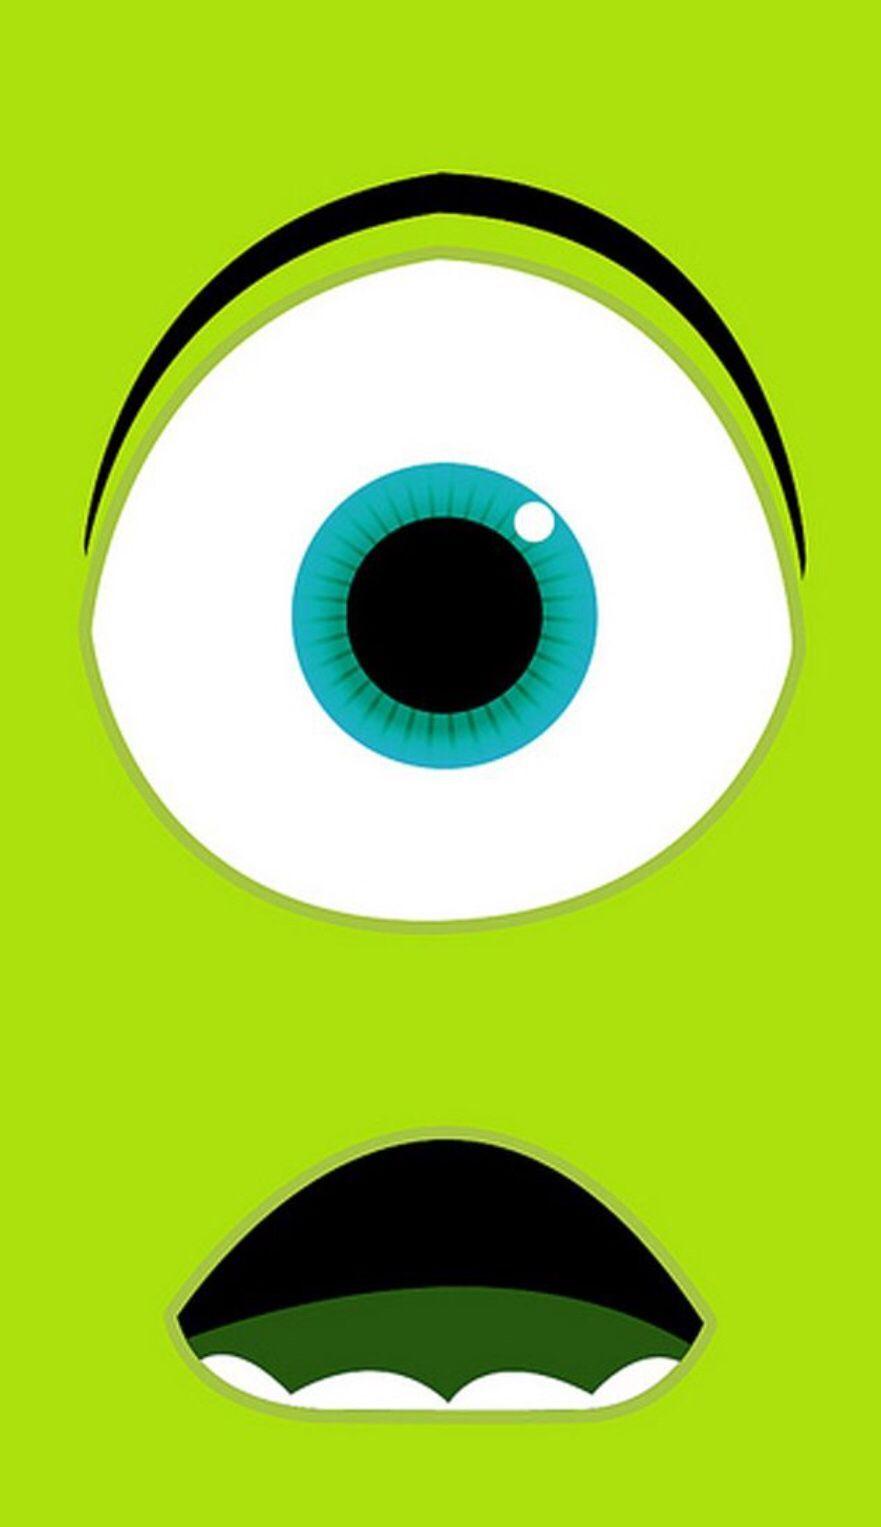 Mike Wazowski Wallpapers Iphone - Wallpaper Cave